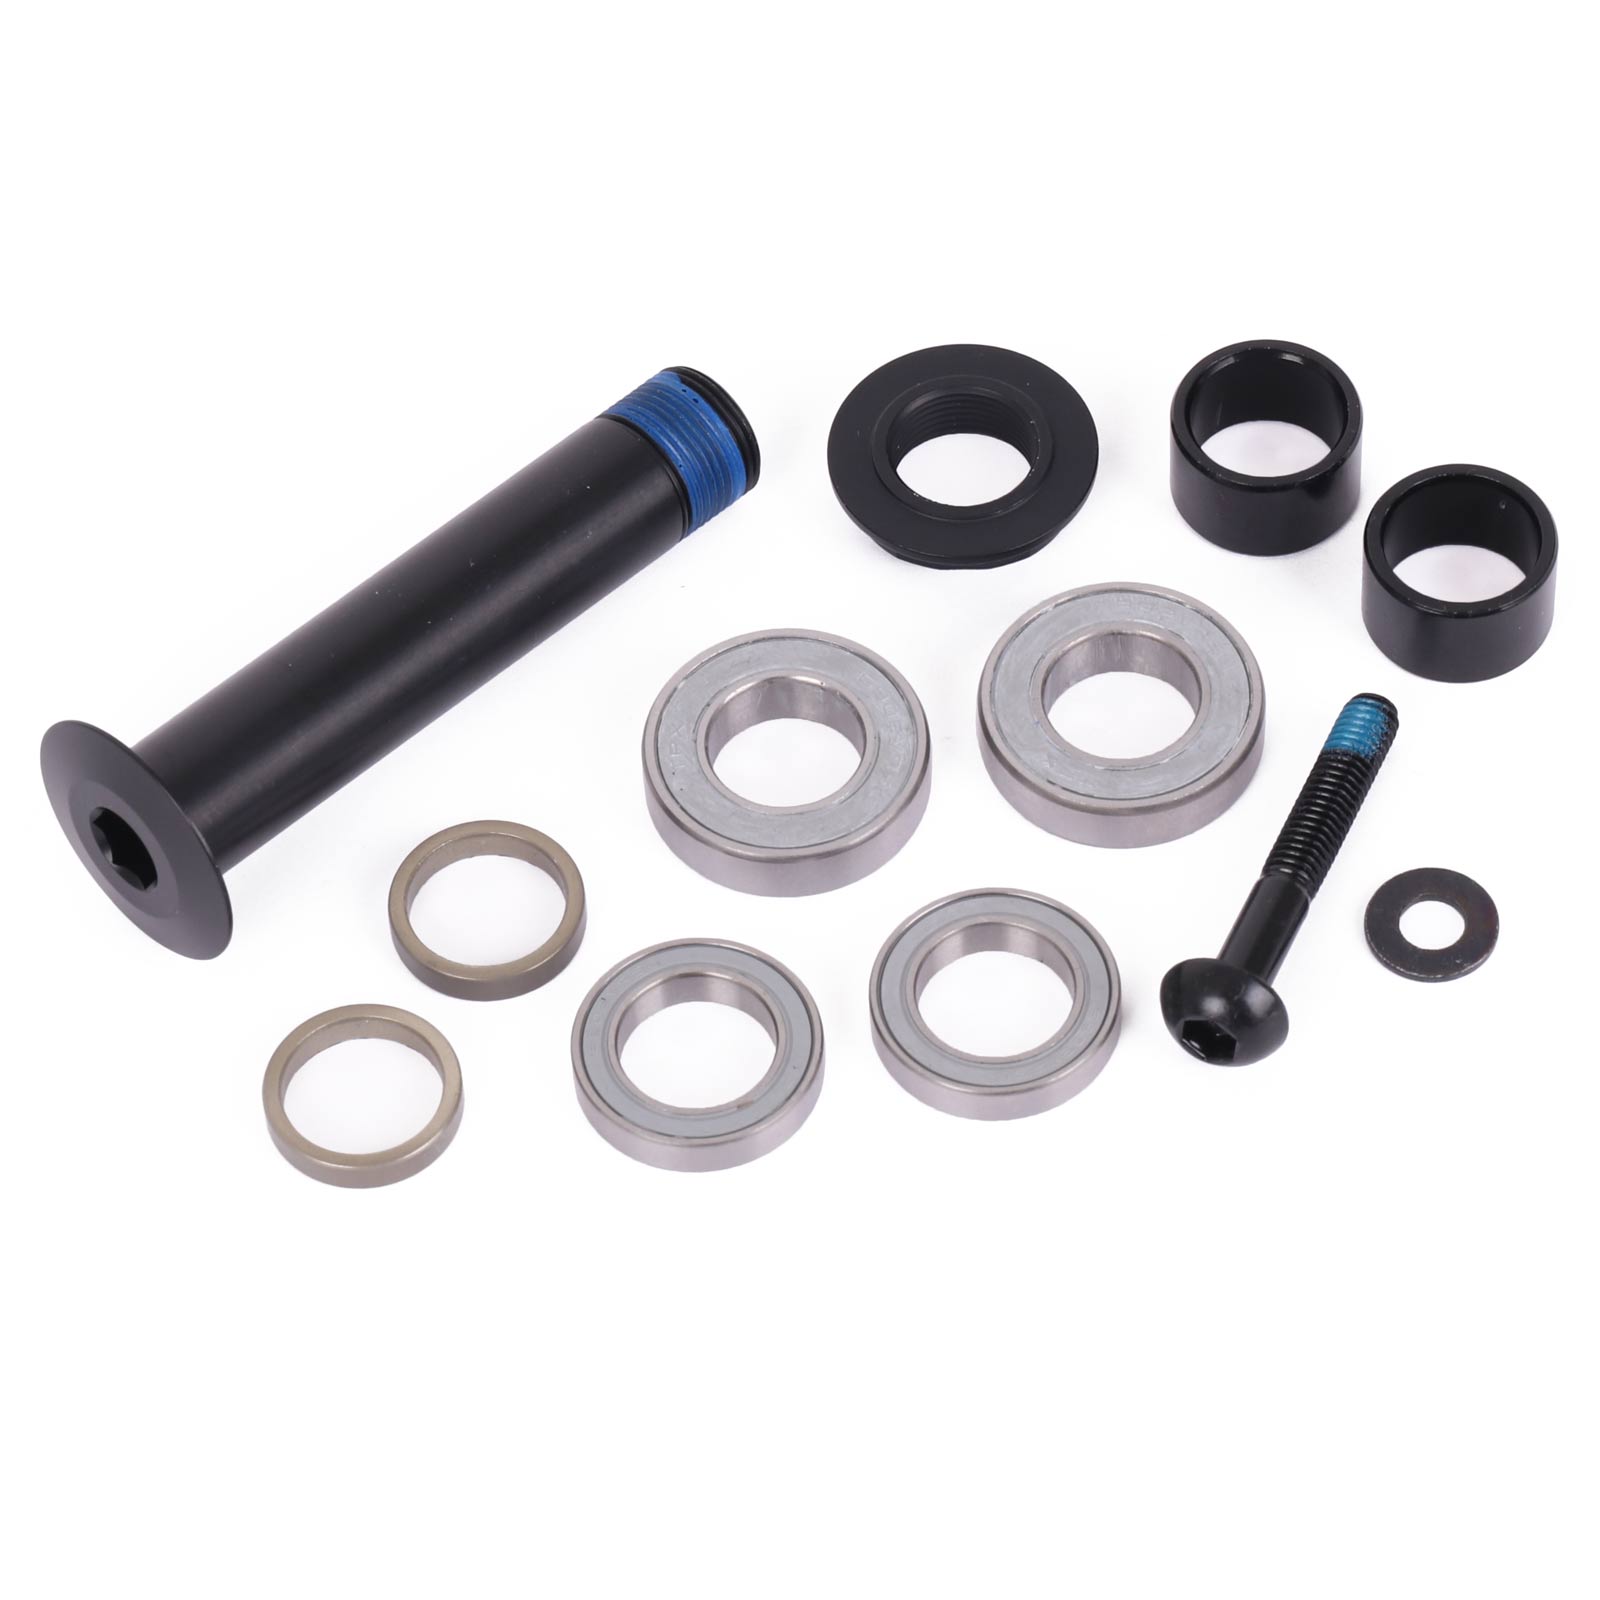 Picture of Giant GSF032 Rear Shock Accessories for Stance / Embolden | Shock Bolt Kit - 1280GSF03201A1